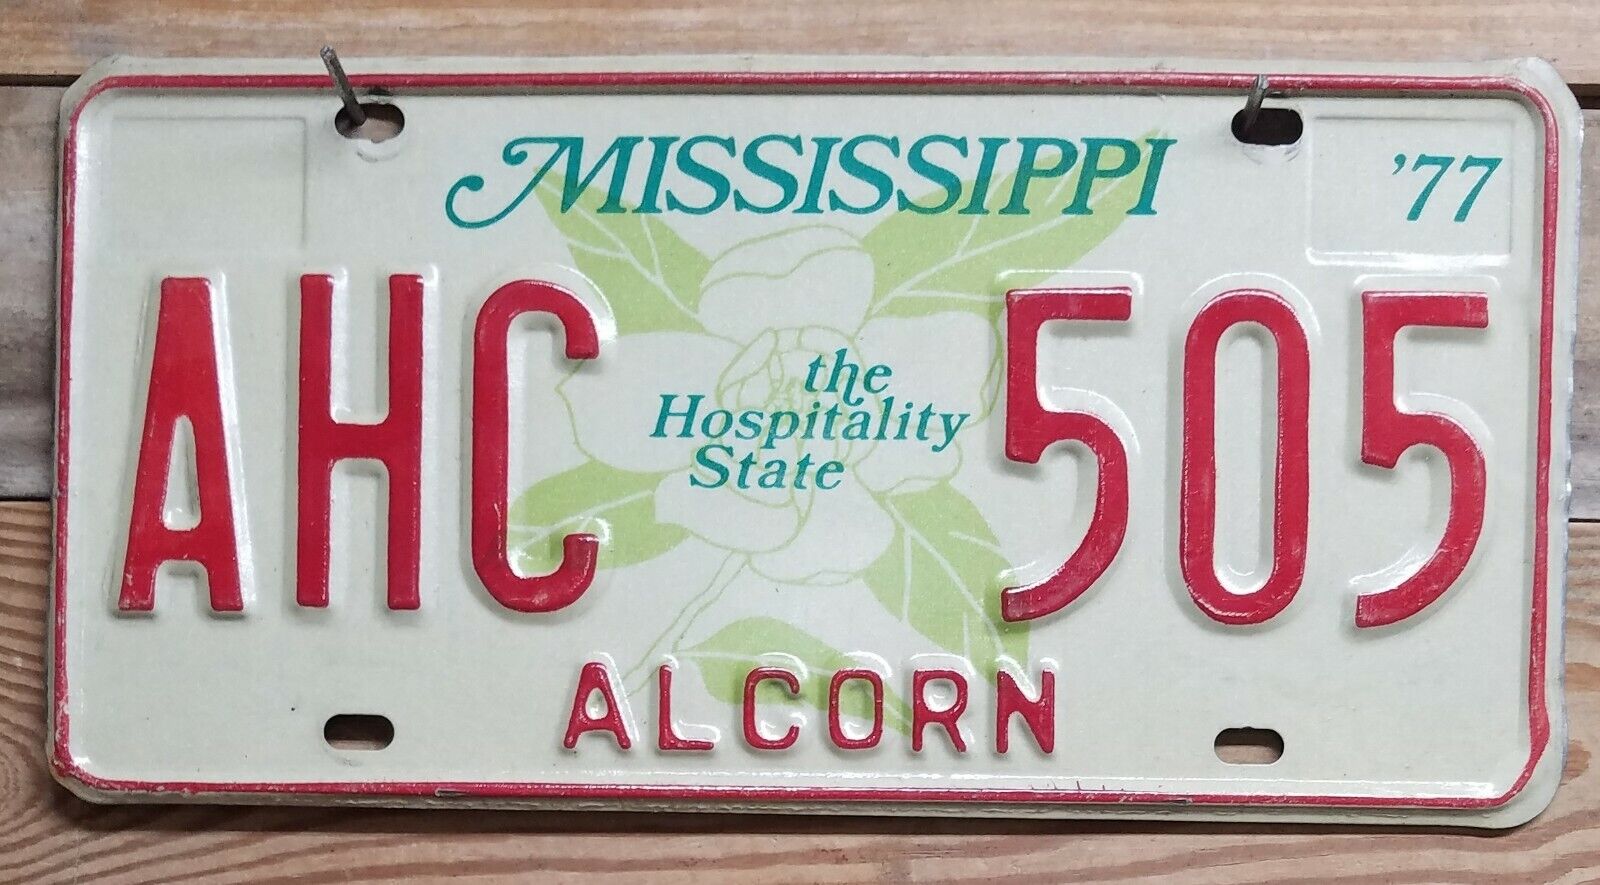 Vintage Mississippi expired 1977 The Hospitality State License Plate/Tag-AHC505